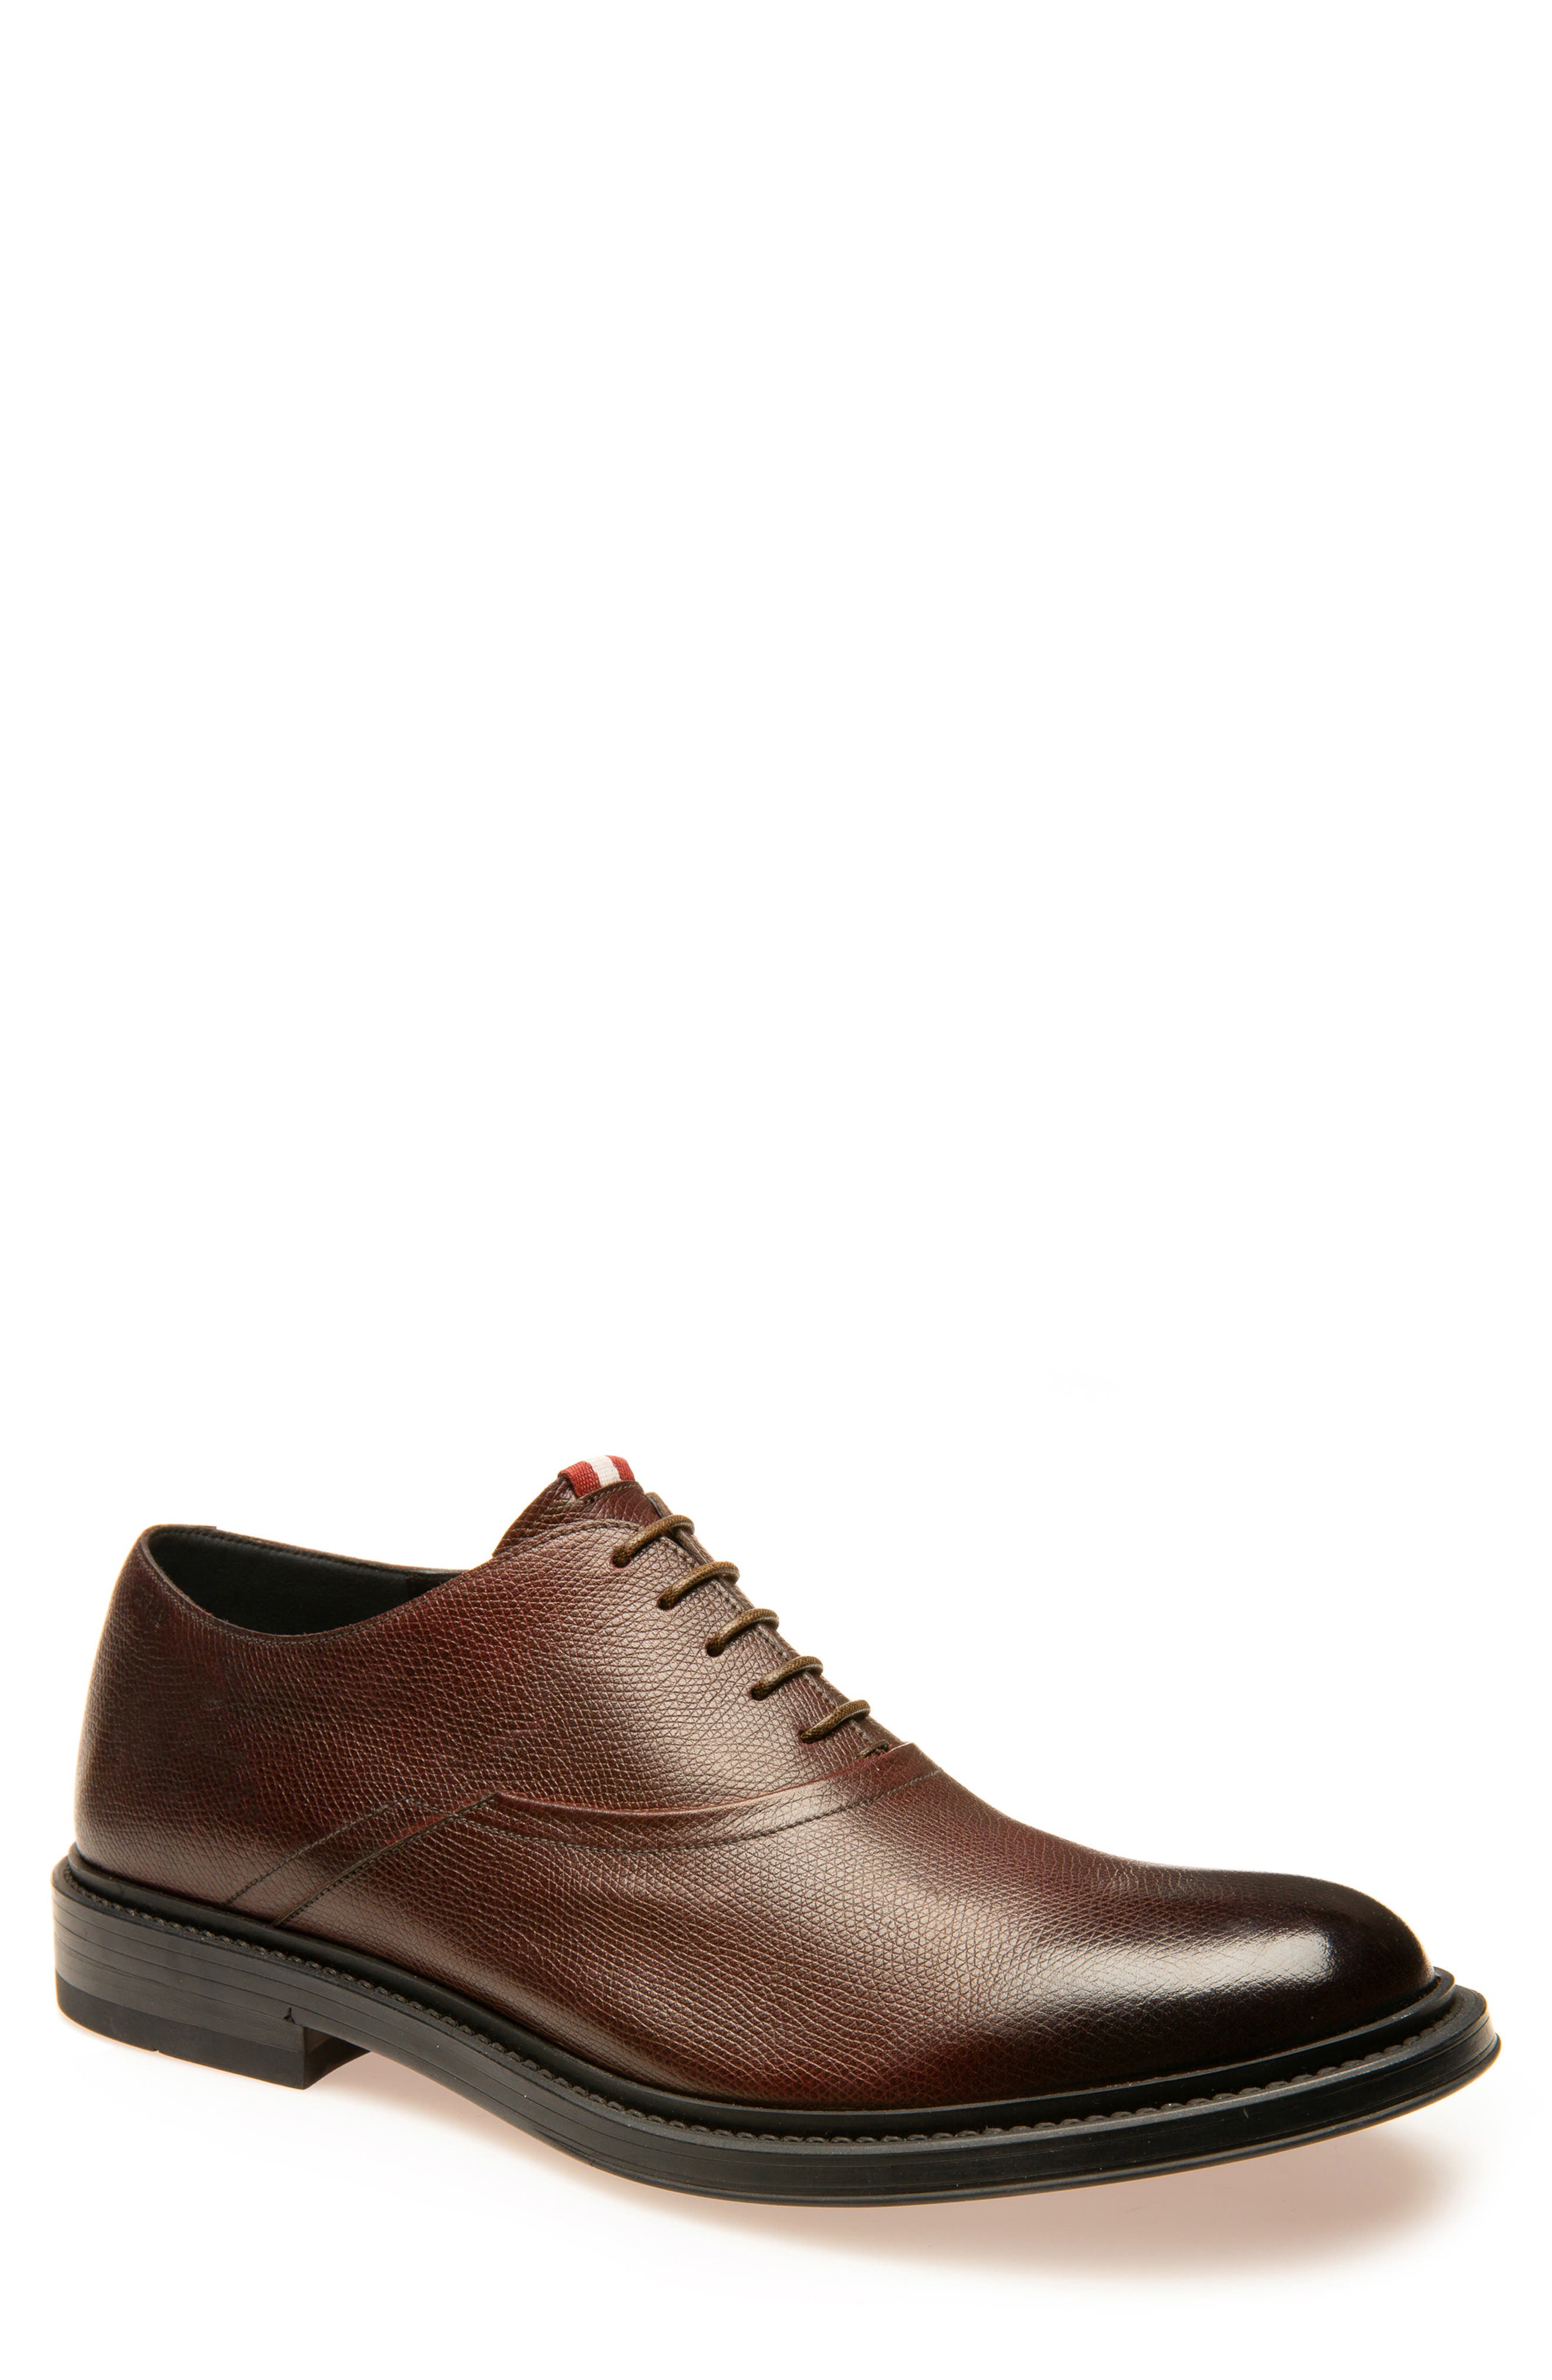 bally leather shoes price